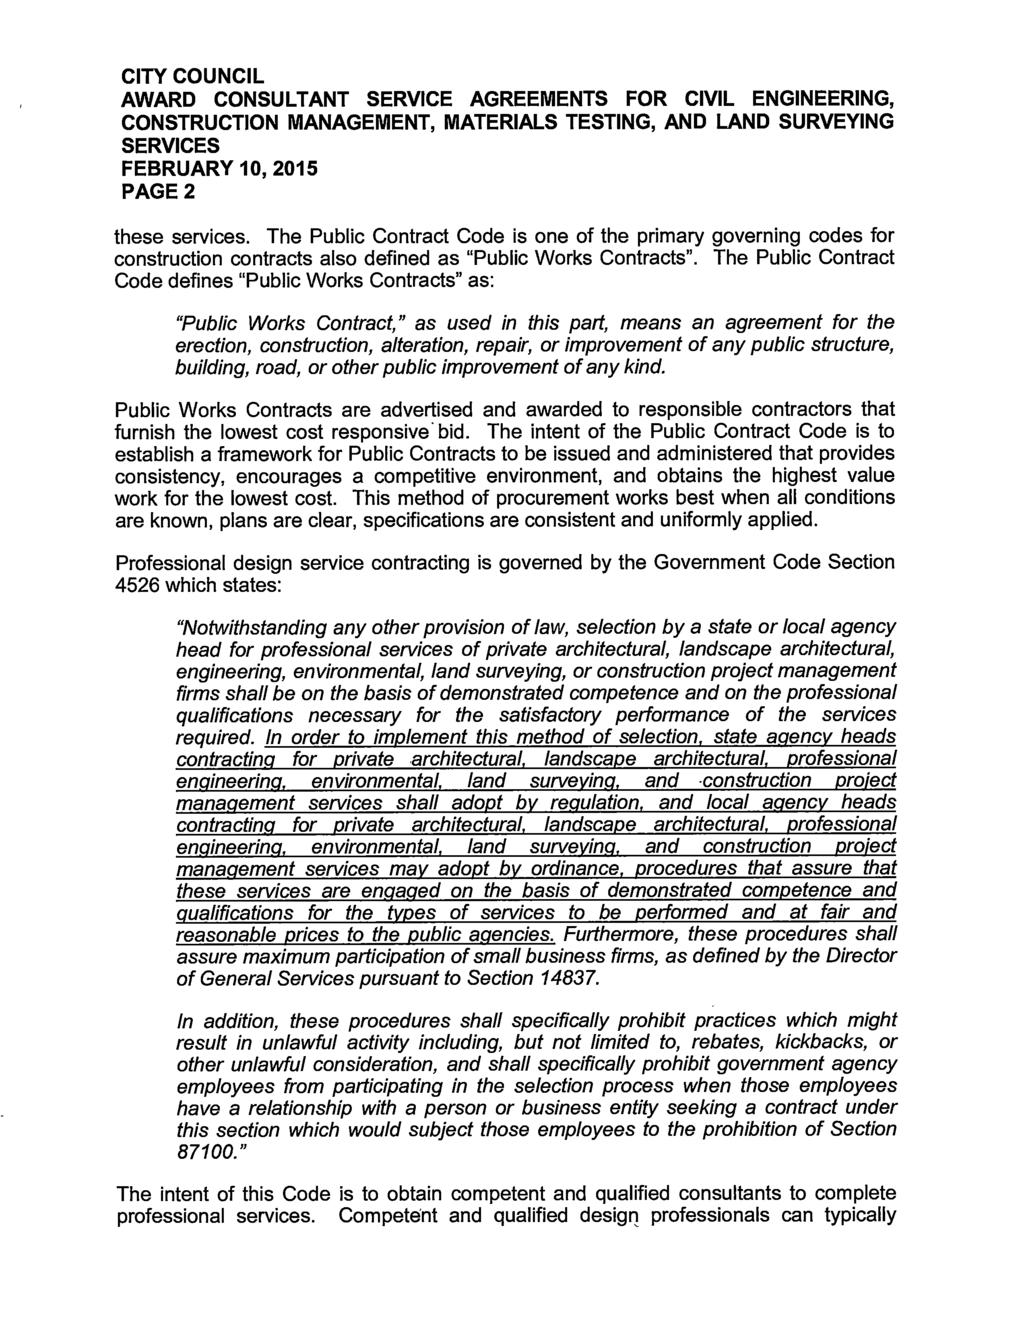 AWARD CONSUL TANT SERVICE AGREEMENTS FOR CIVIL ENGINEERING, PAGE2 these services.